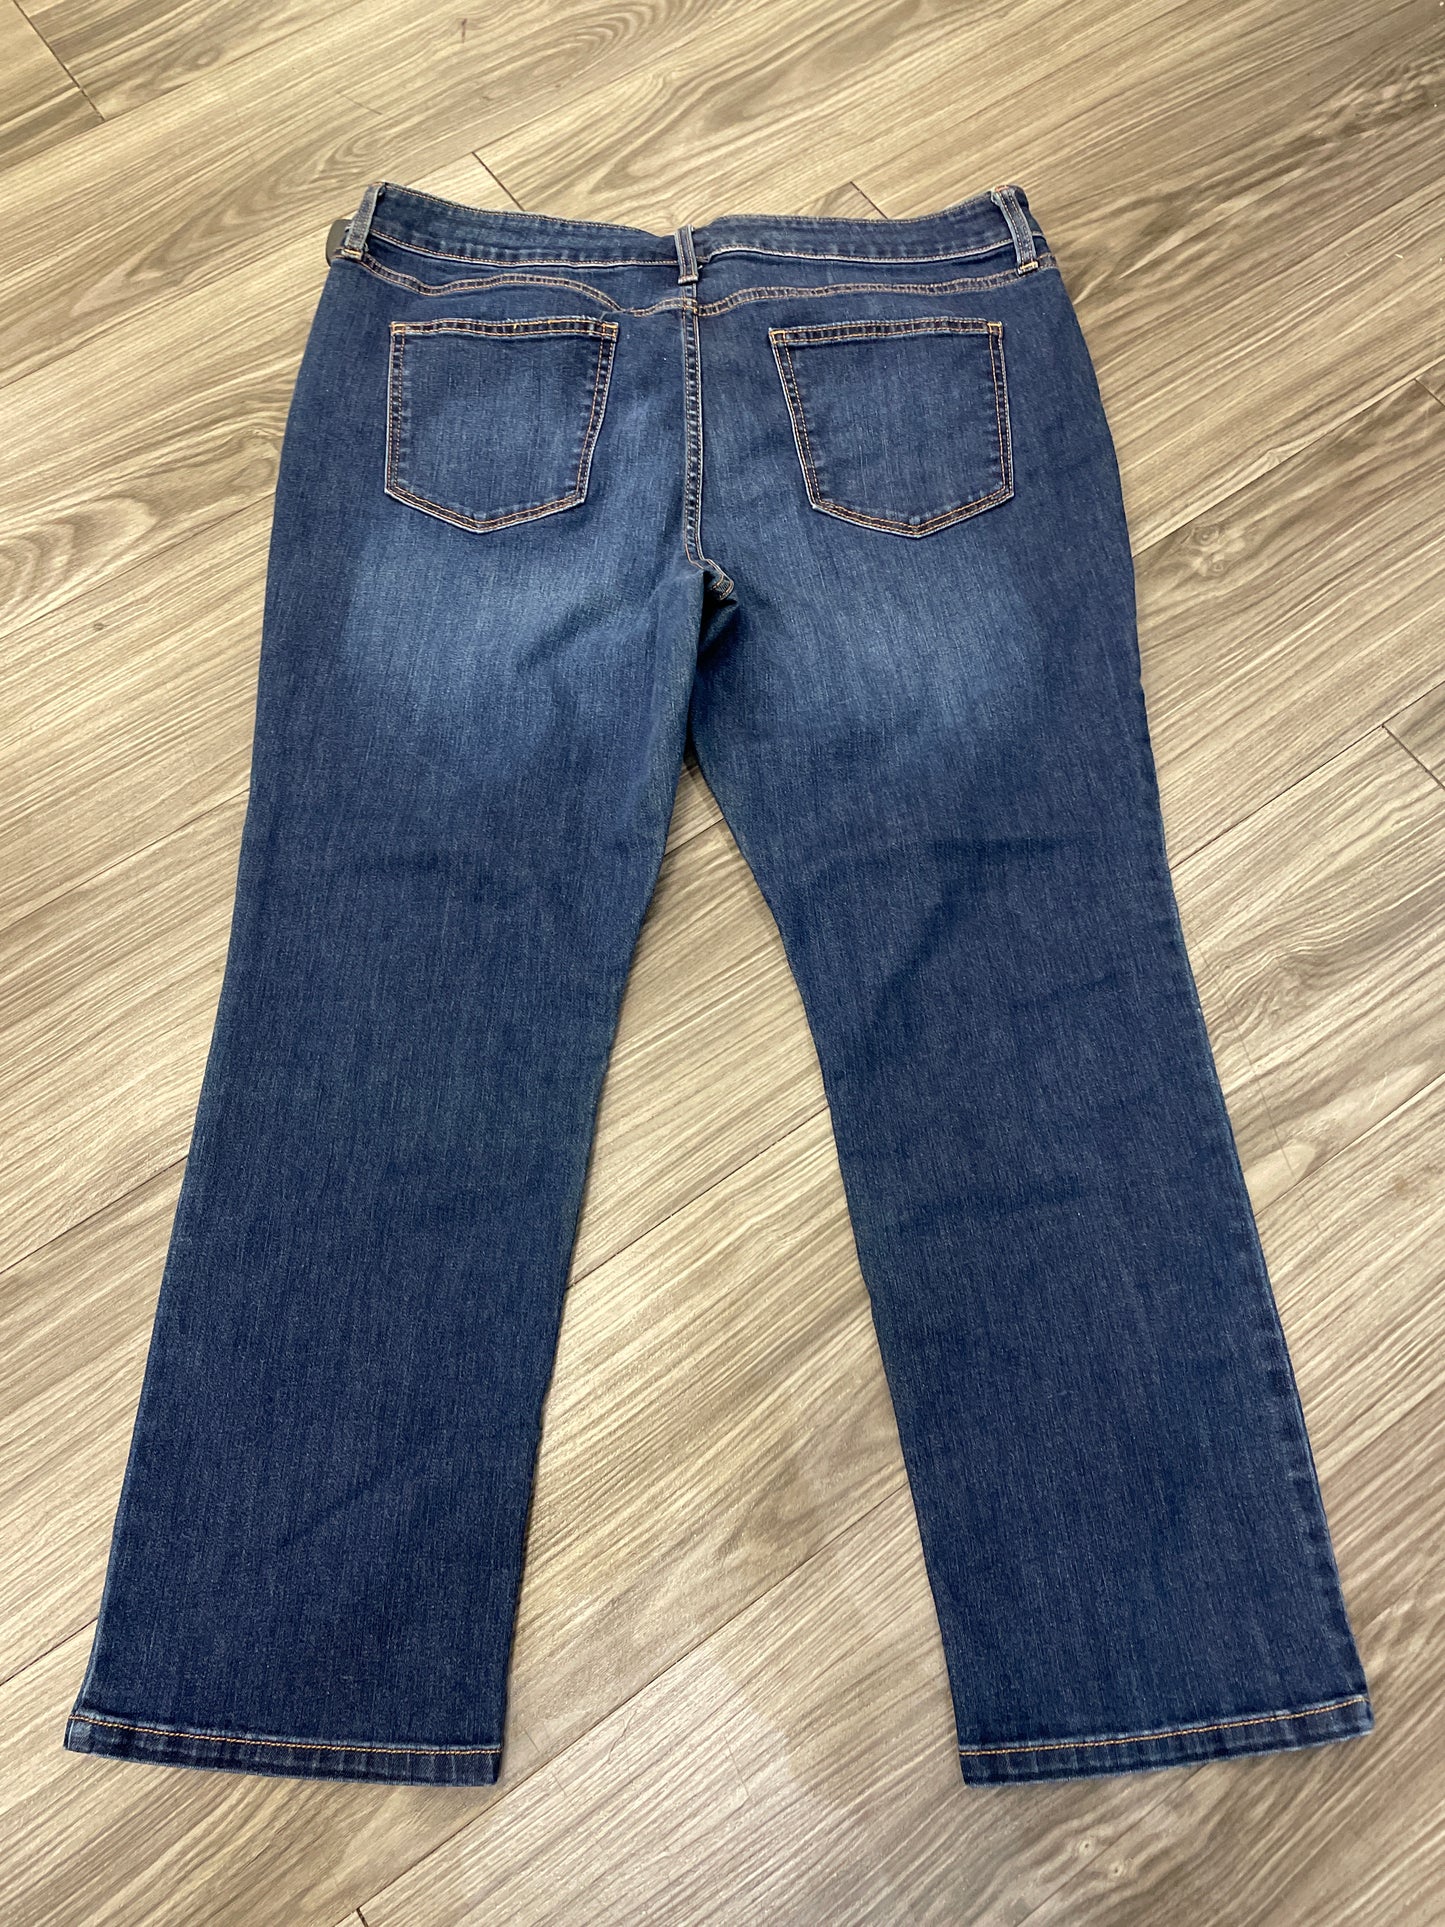 Jeans Straight By St Johns Bay  Size: 16